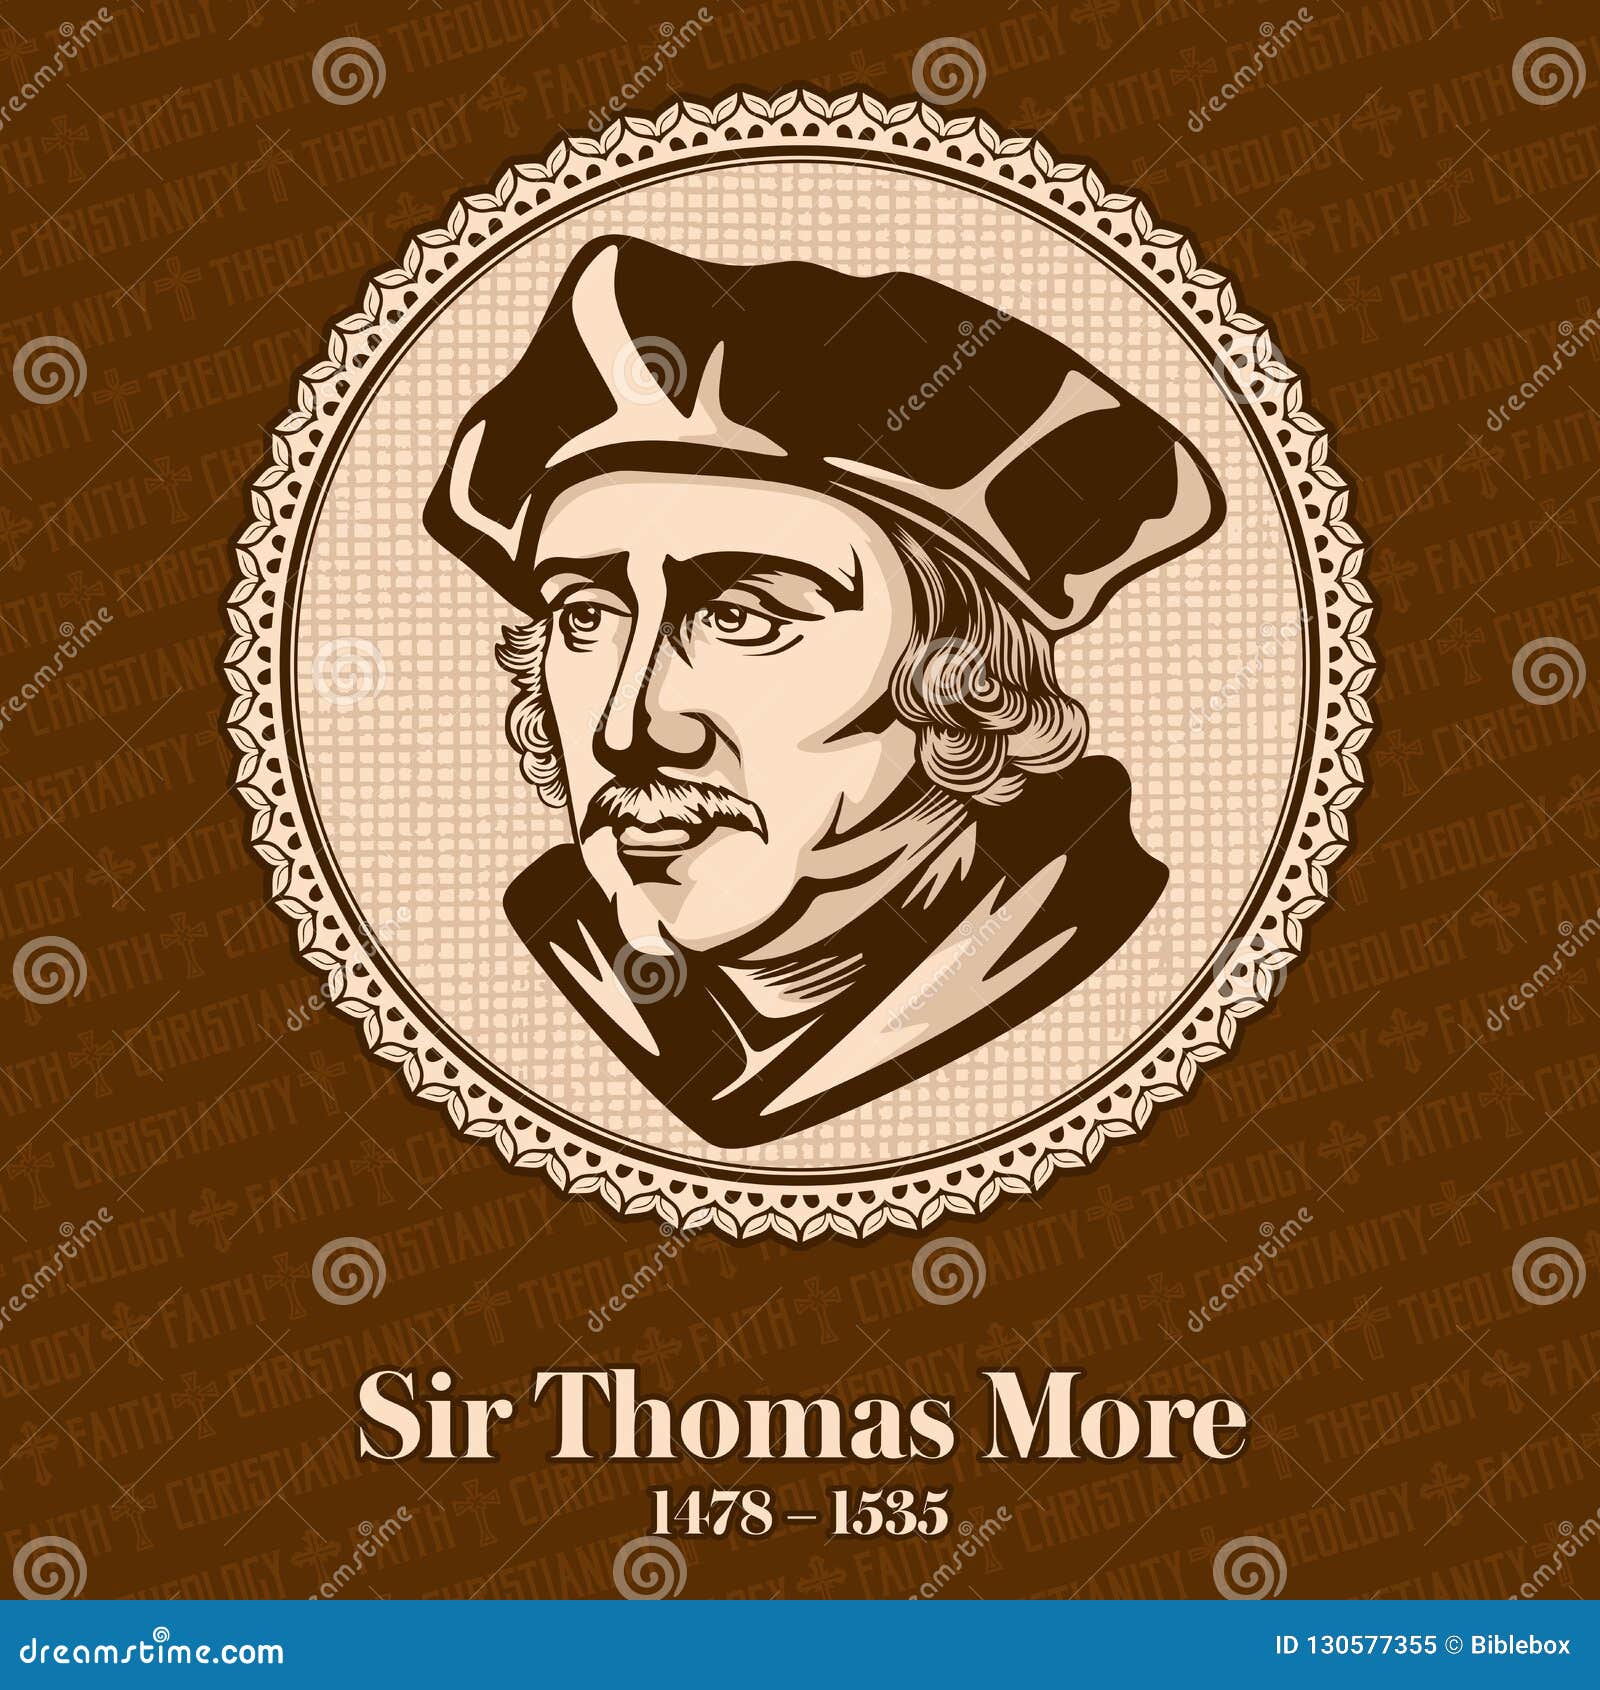 Sir Thomas More 1478 1535 Was An English Lawyer Social Philosopher Author Statesman And Noted Renaissance Humanist Stock Vector Illustration Of Catholic Century 130577355